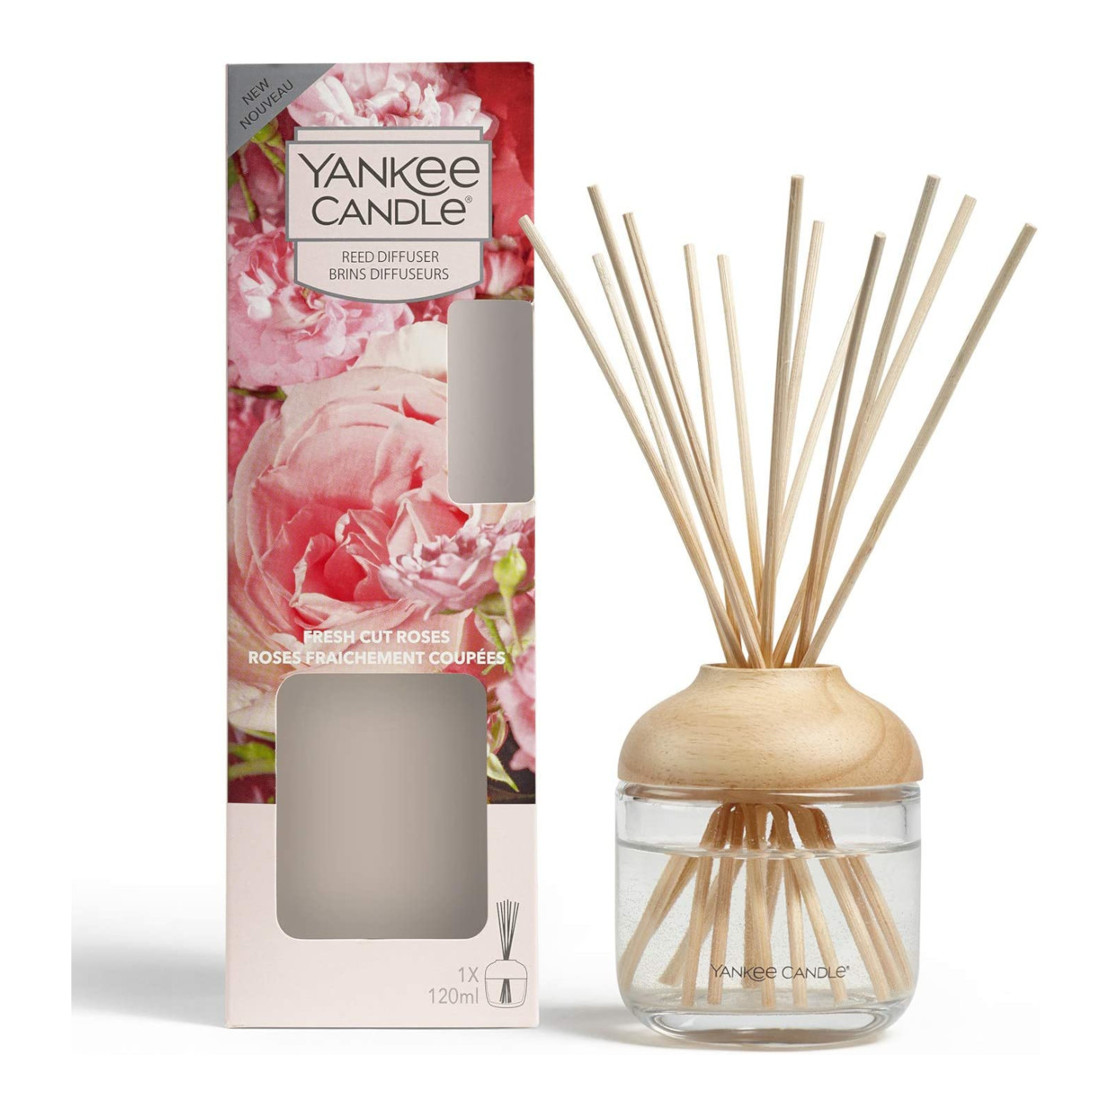 Yankee Candle Fresh Cut Roses Reed Diffuser